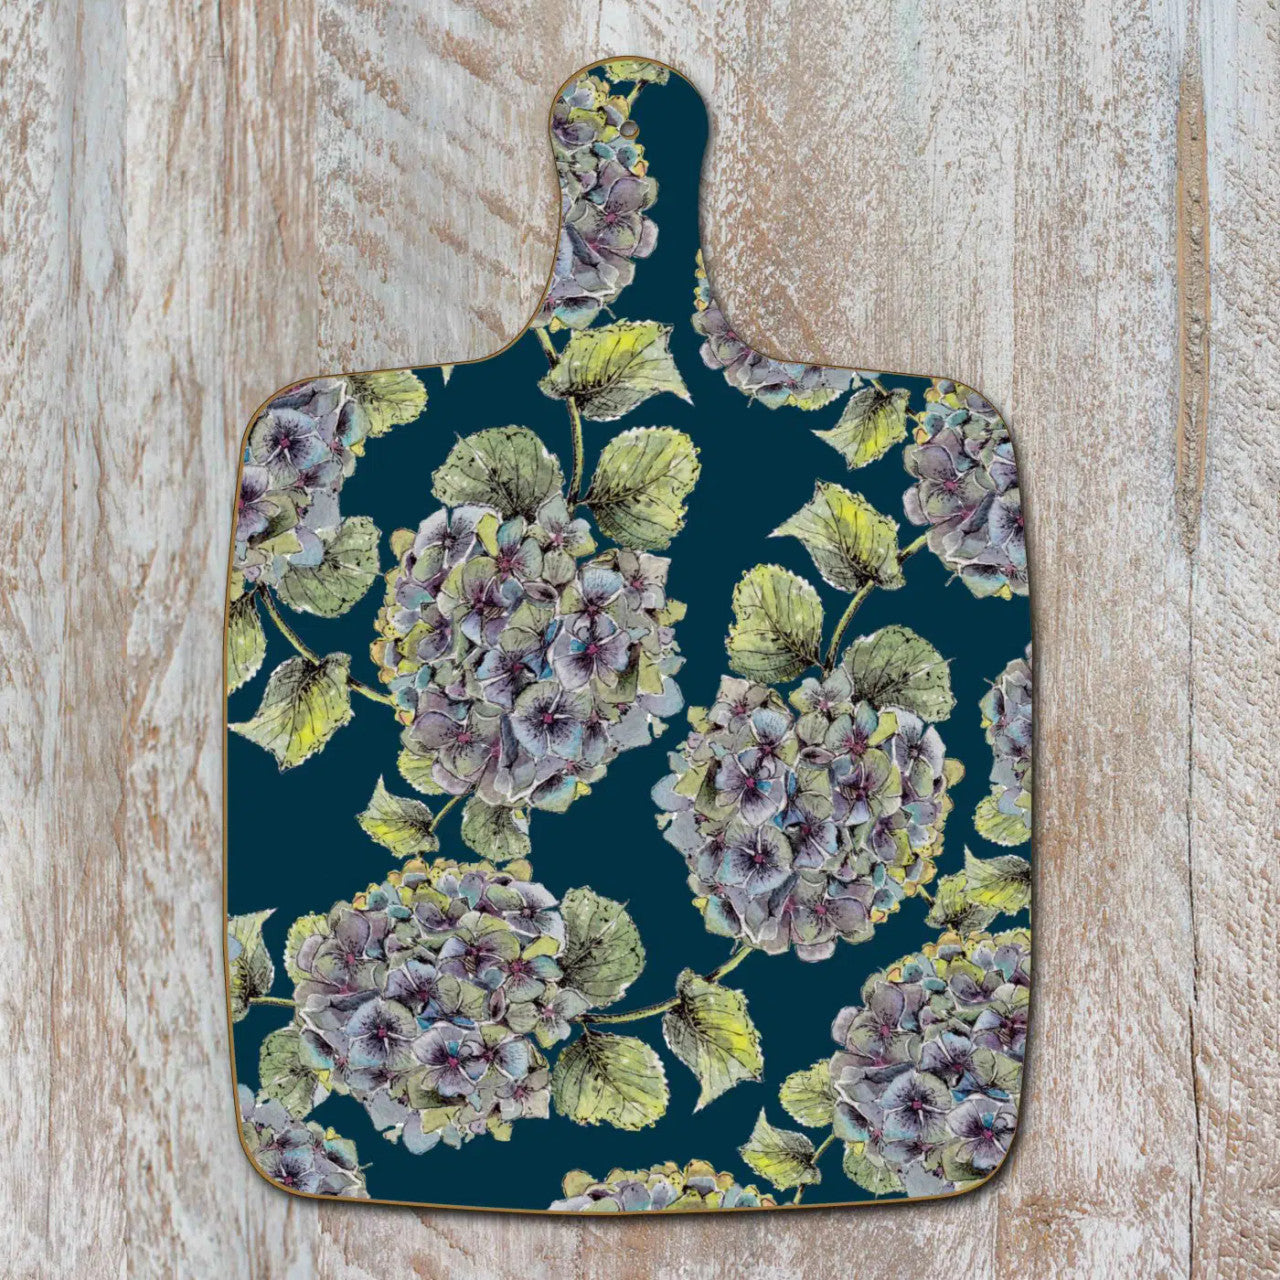 Hydrangea Pure Large Chopping Board by Toasted Crumpet.